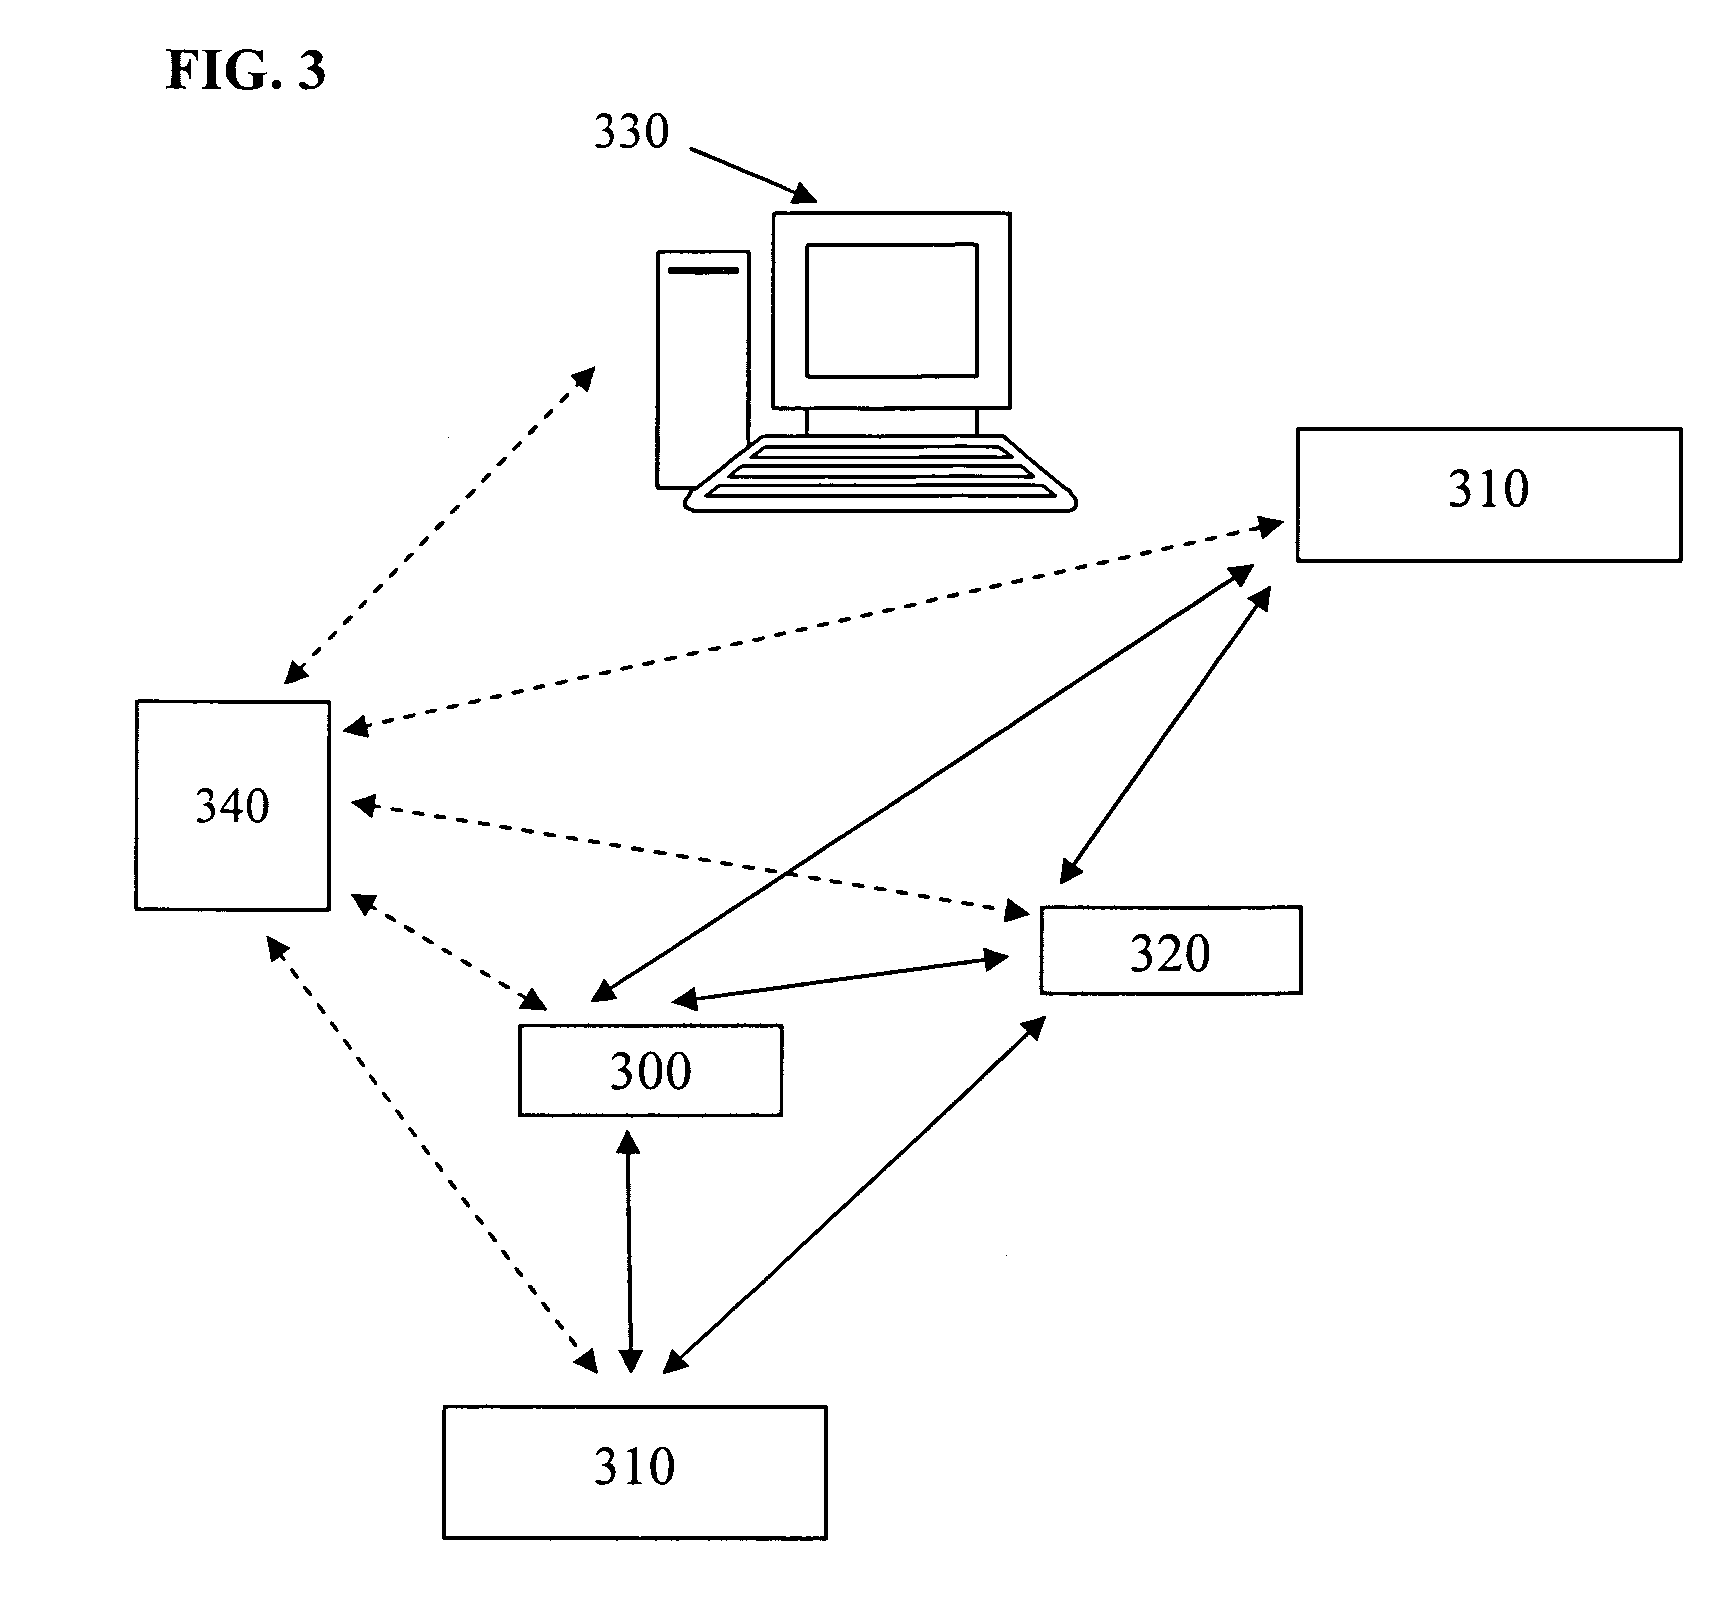 Location and tracking system, method and device using wireless technology